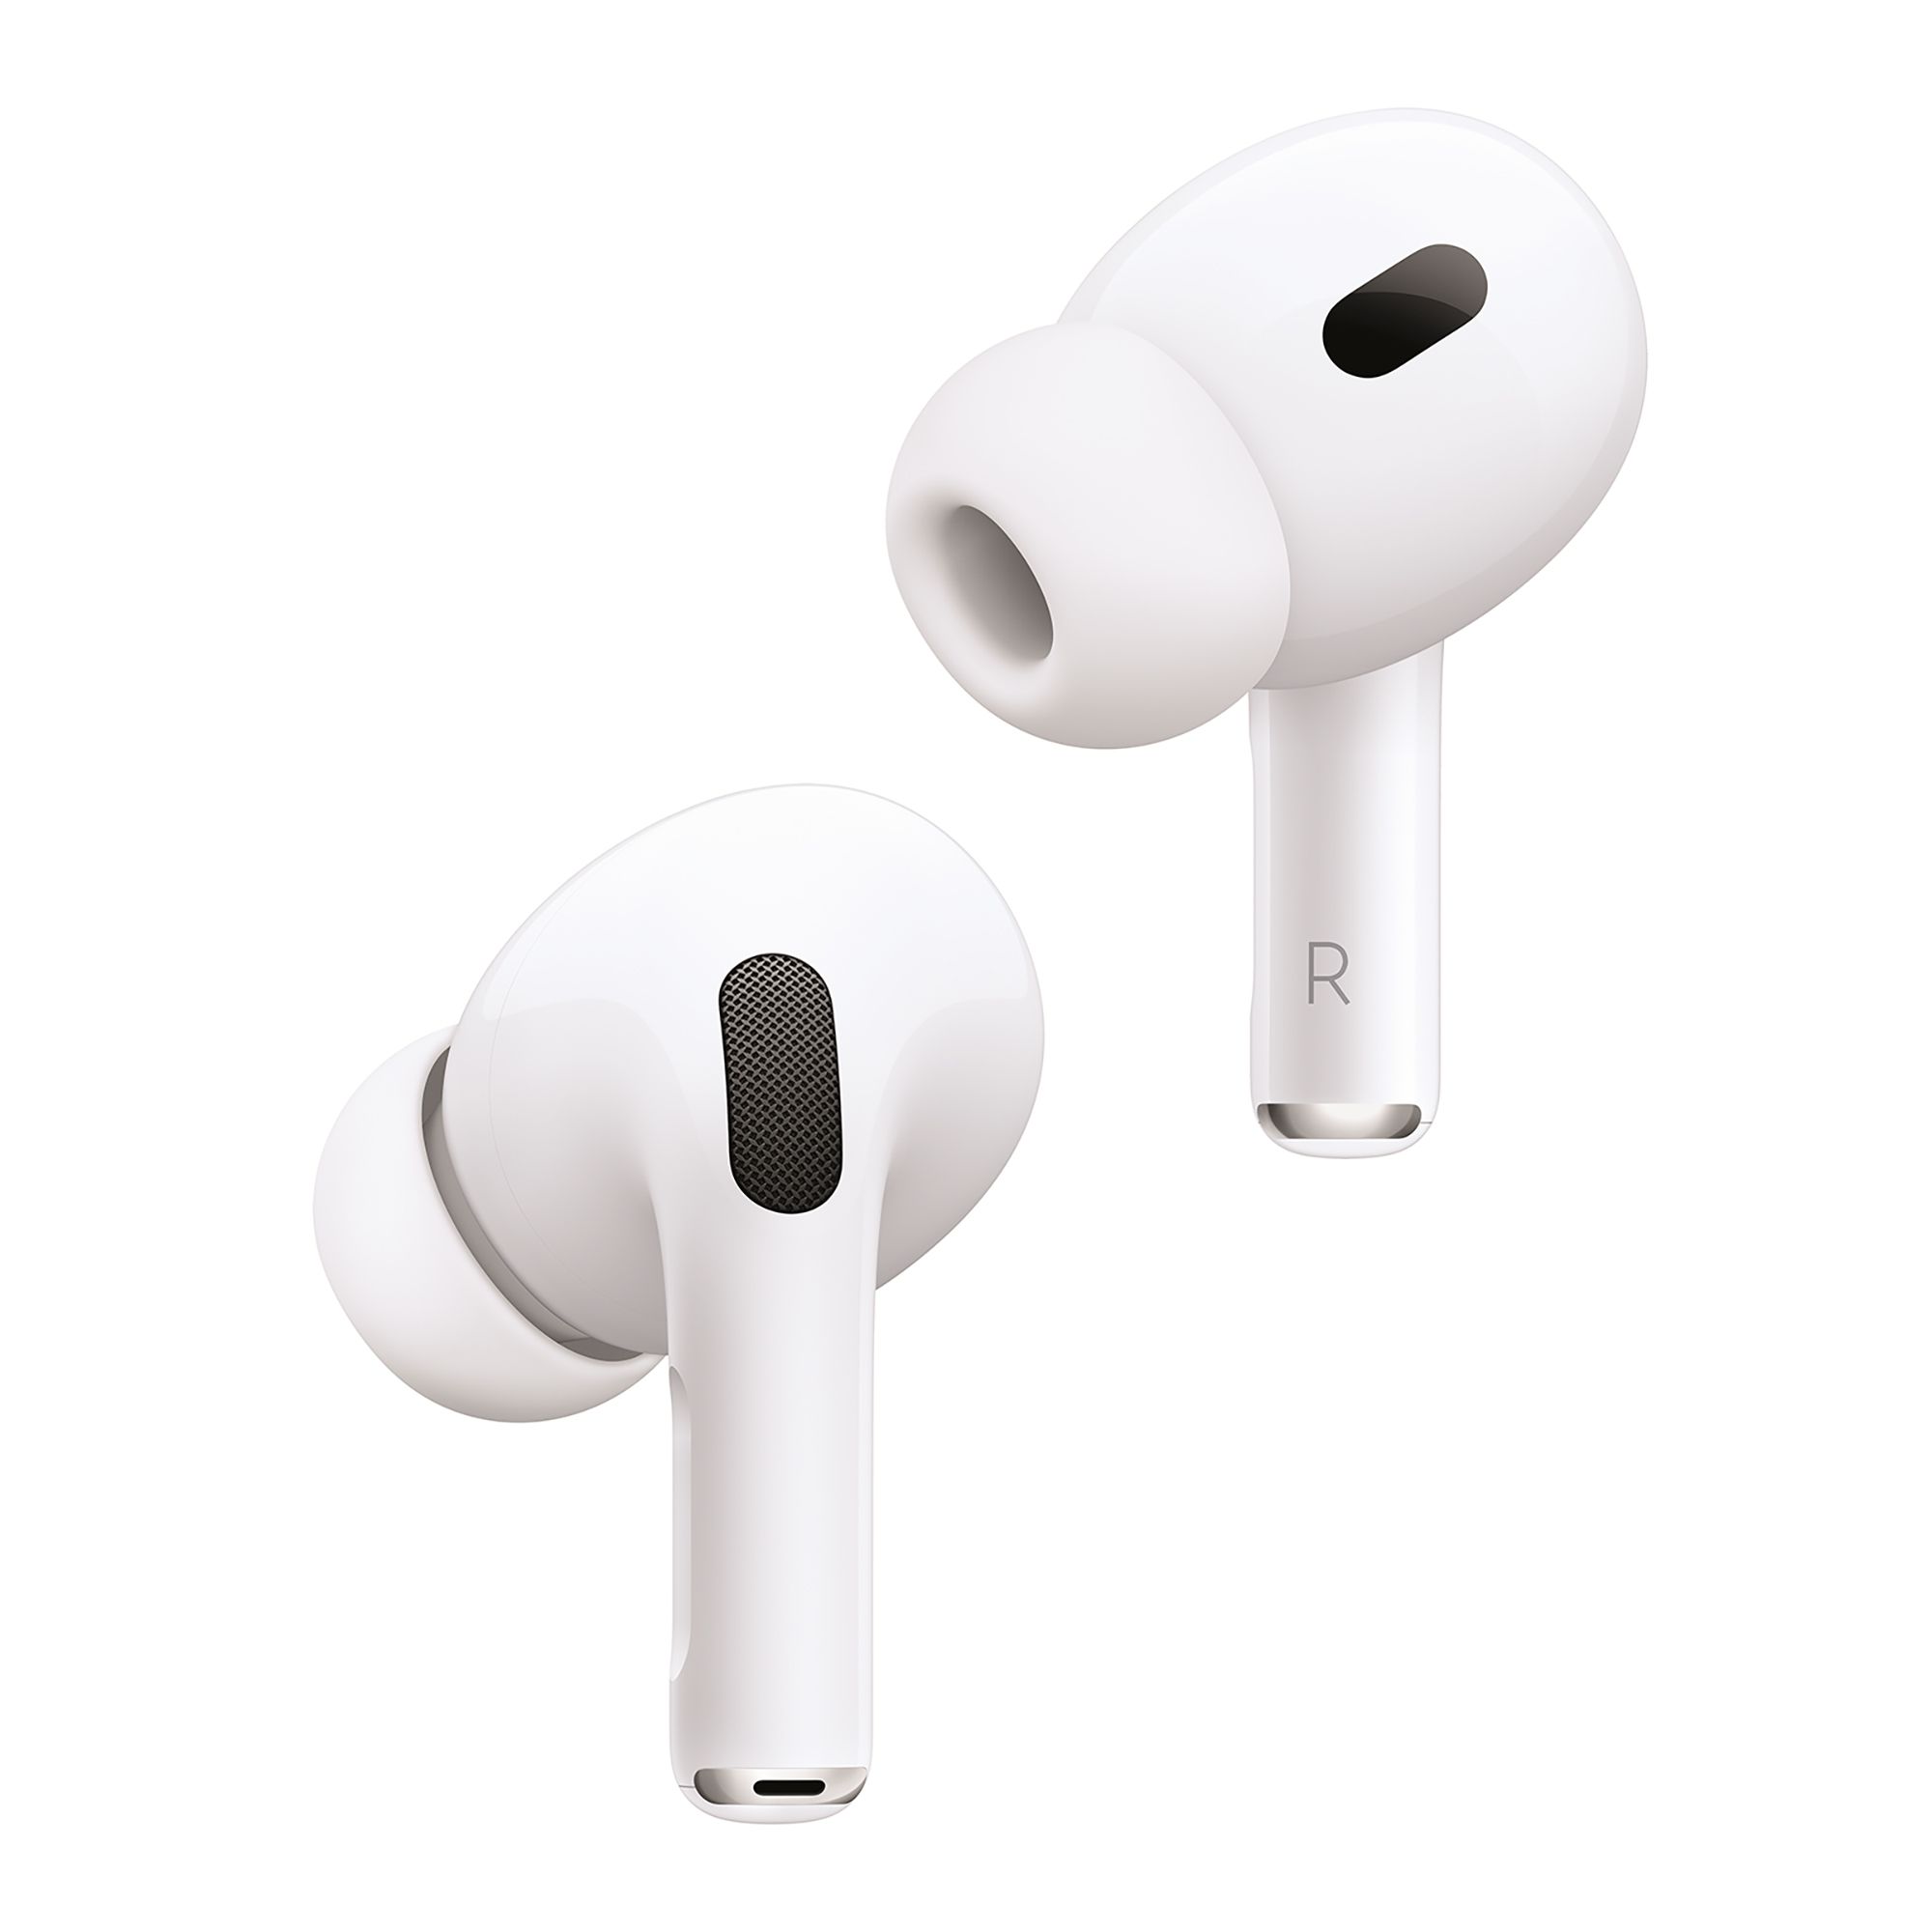 Apple AirPods Pro (2nd Generation) - White